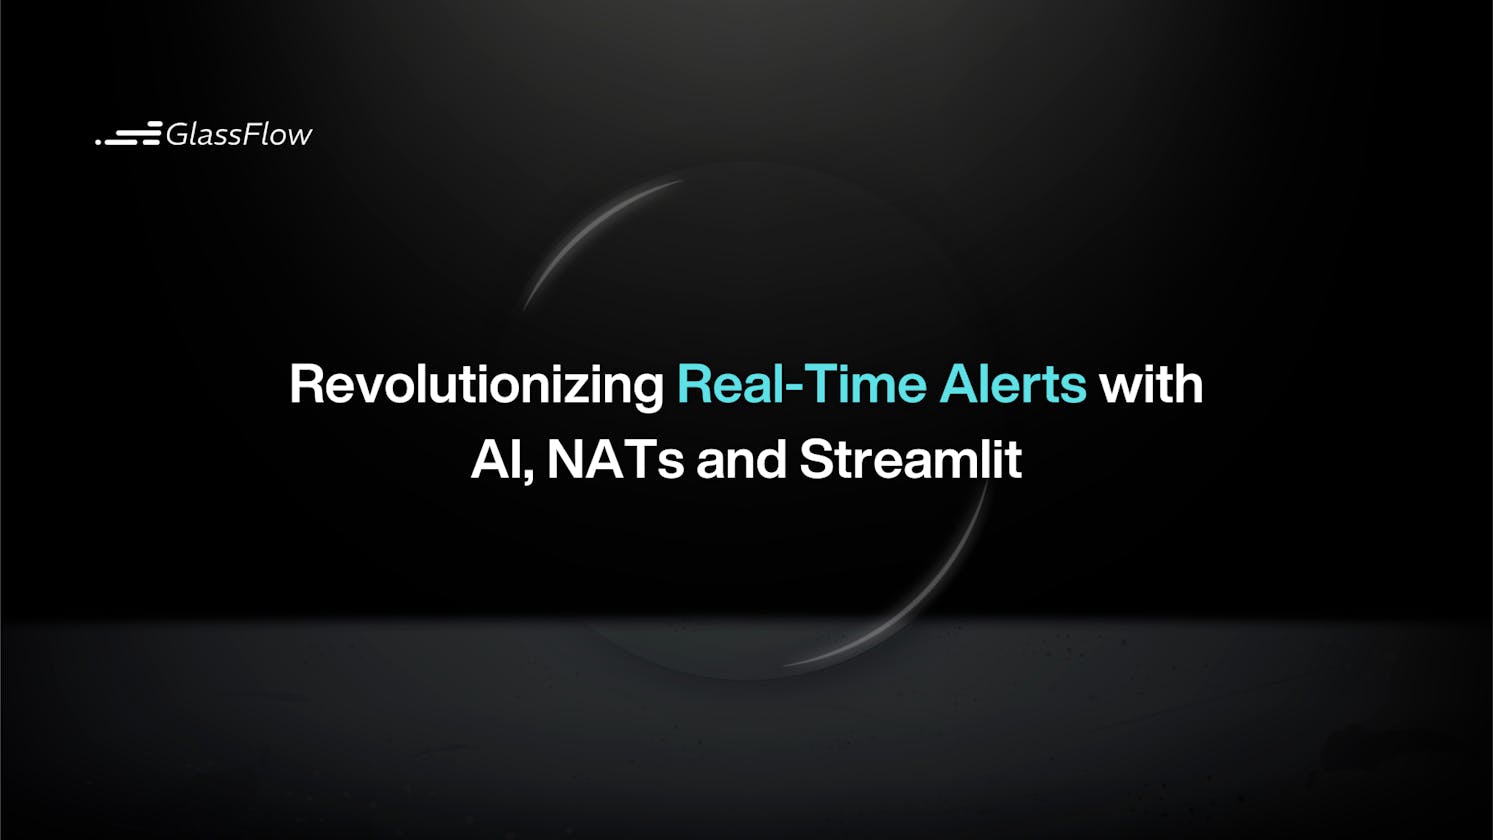 Revolutionizing Real-Time Alerts with AI, NATs and Streamlit